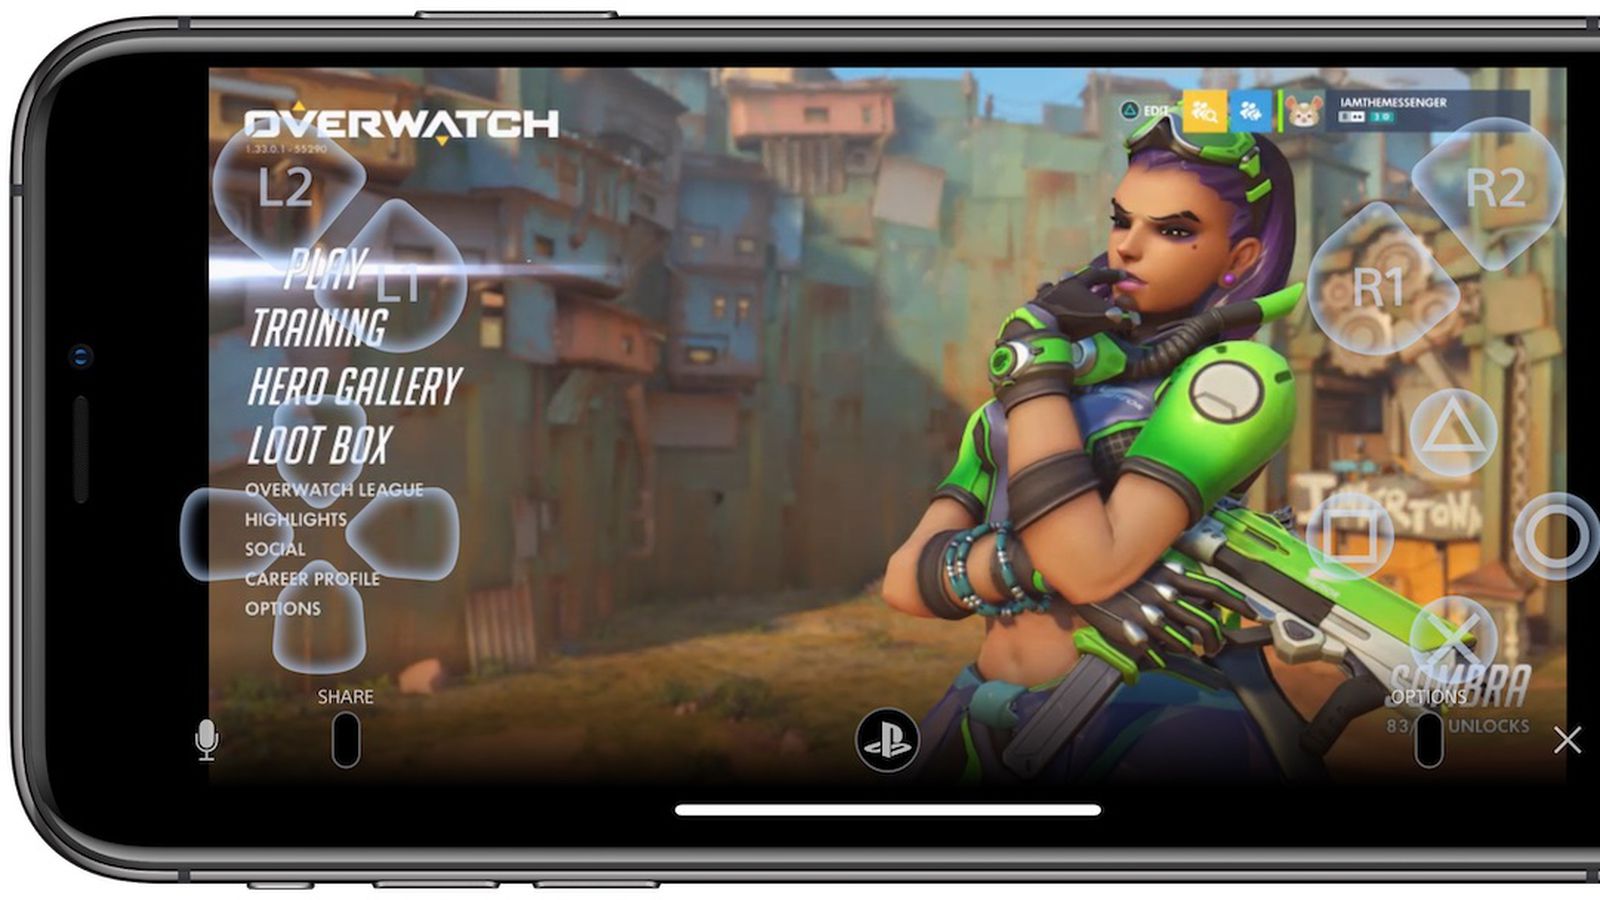 Releases Remote Play App to Control Your PS4 With iPhone or iPad - MacRumors